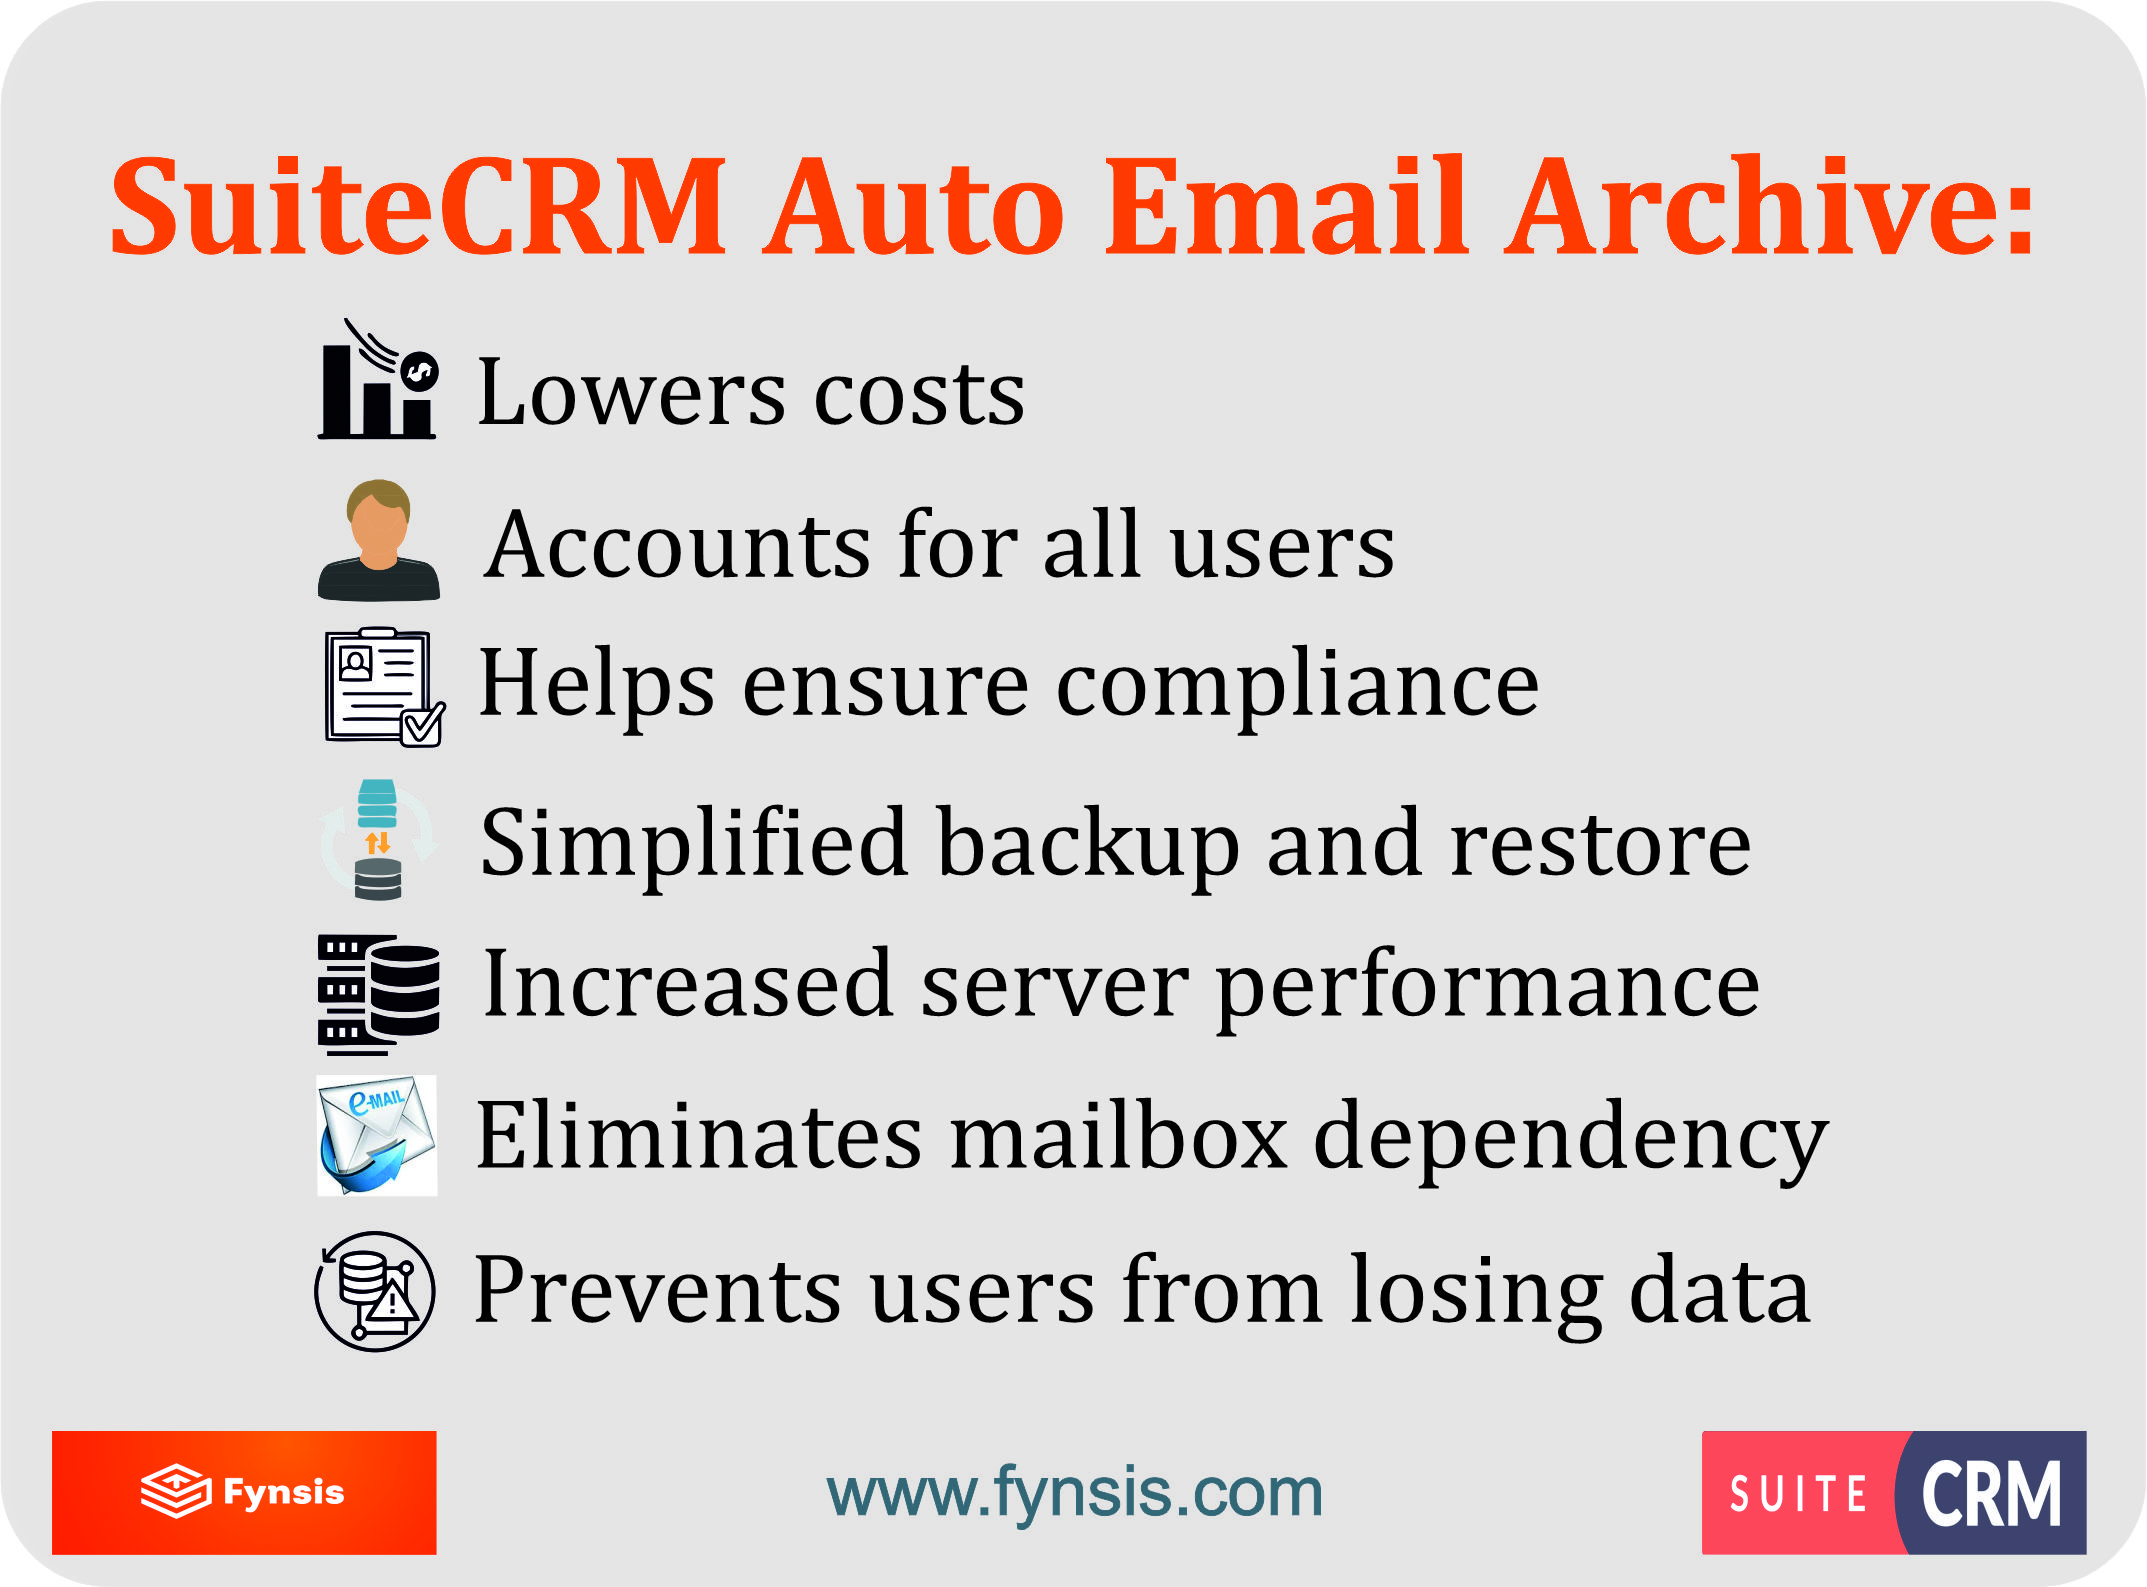 Auto Email Archive add-on for SuiteCRM benefits list